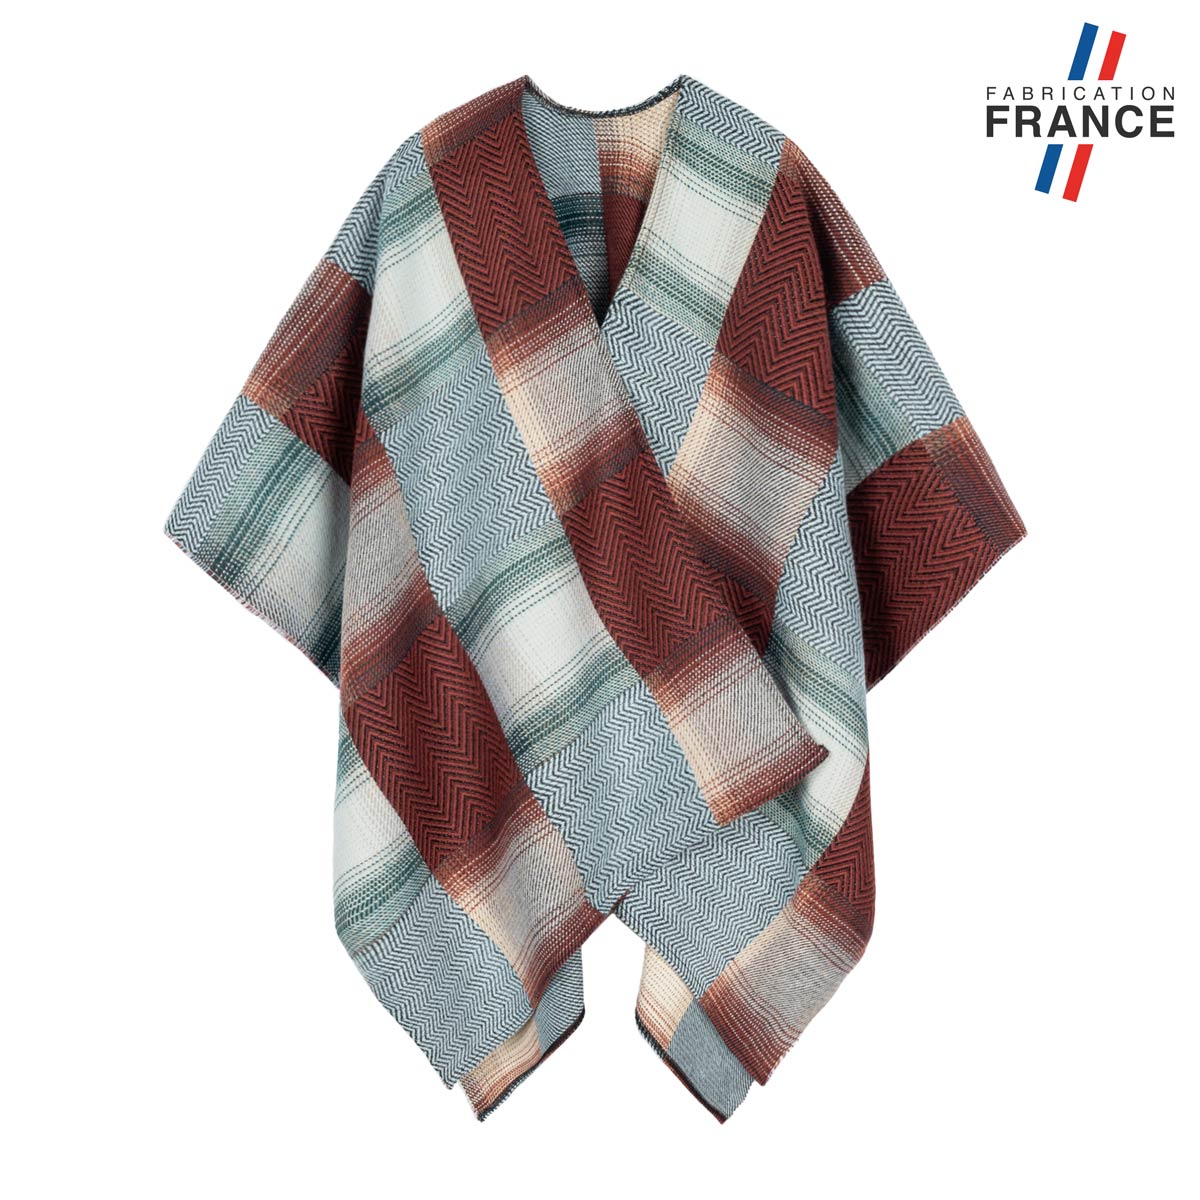 Poncho-femme-gris-marron-fabrication-francaise--AT-07021_F12-1FR